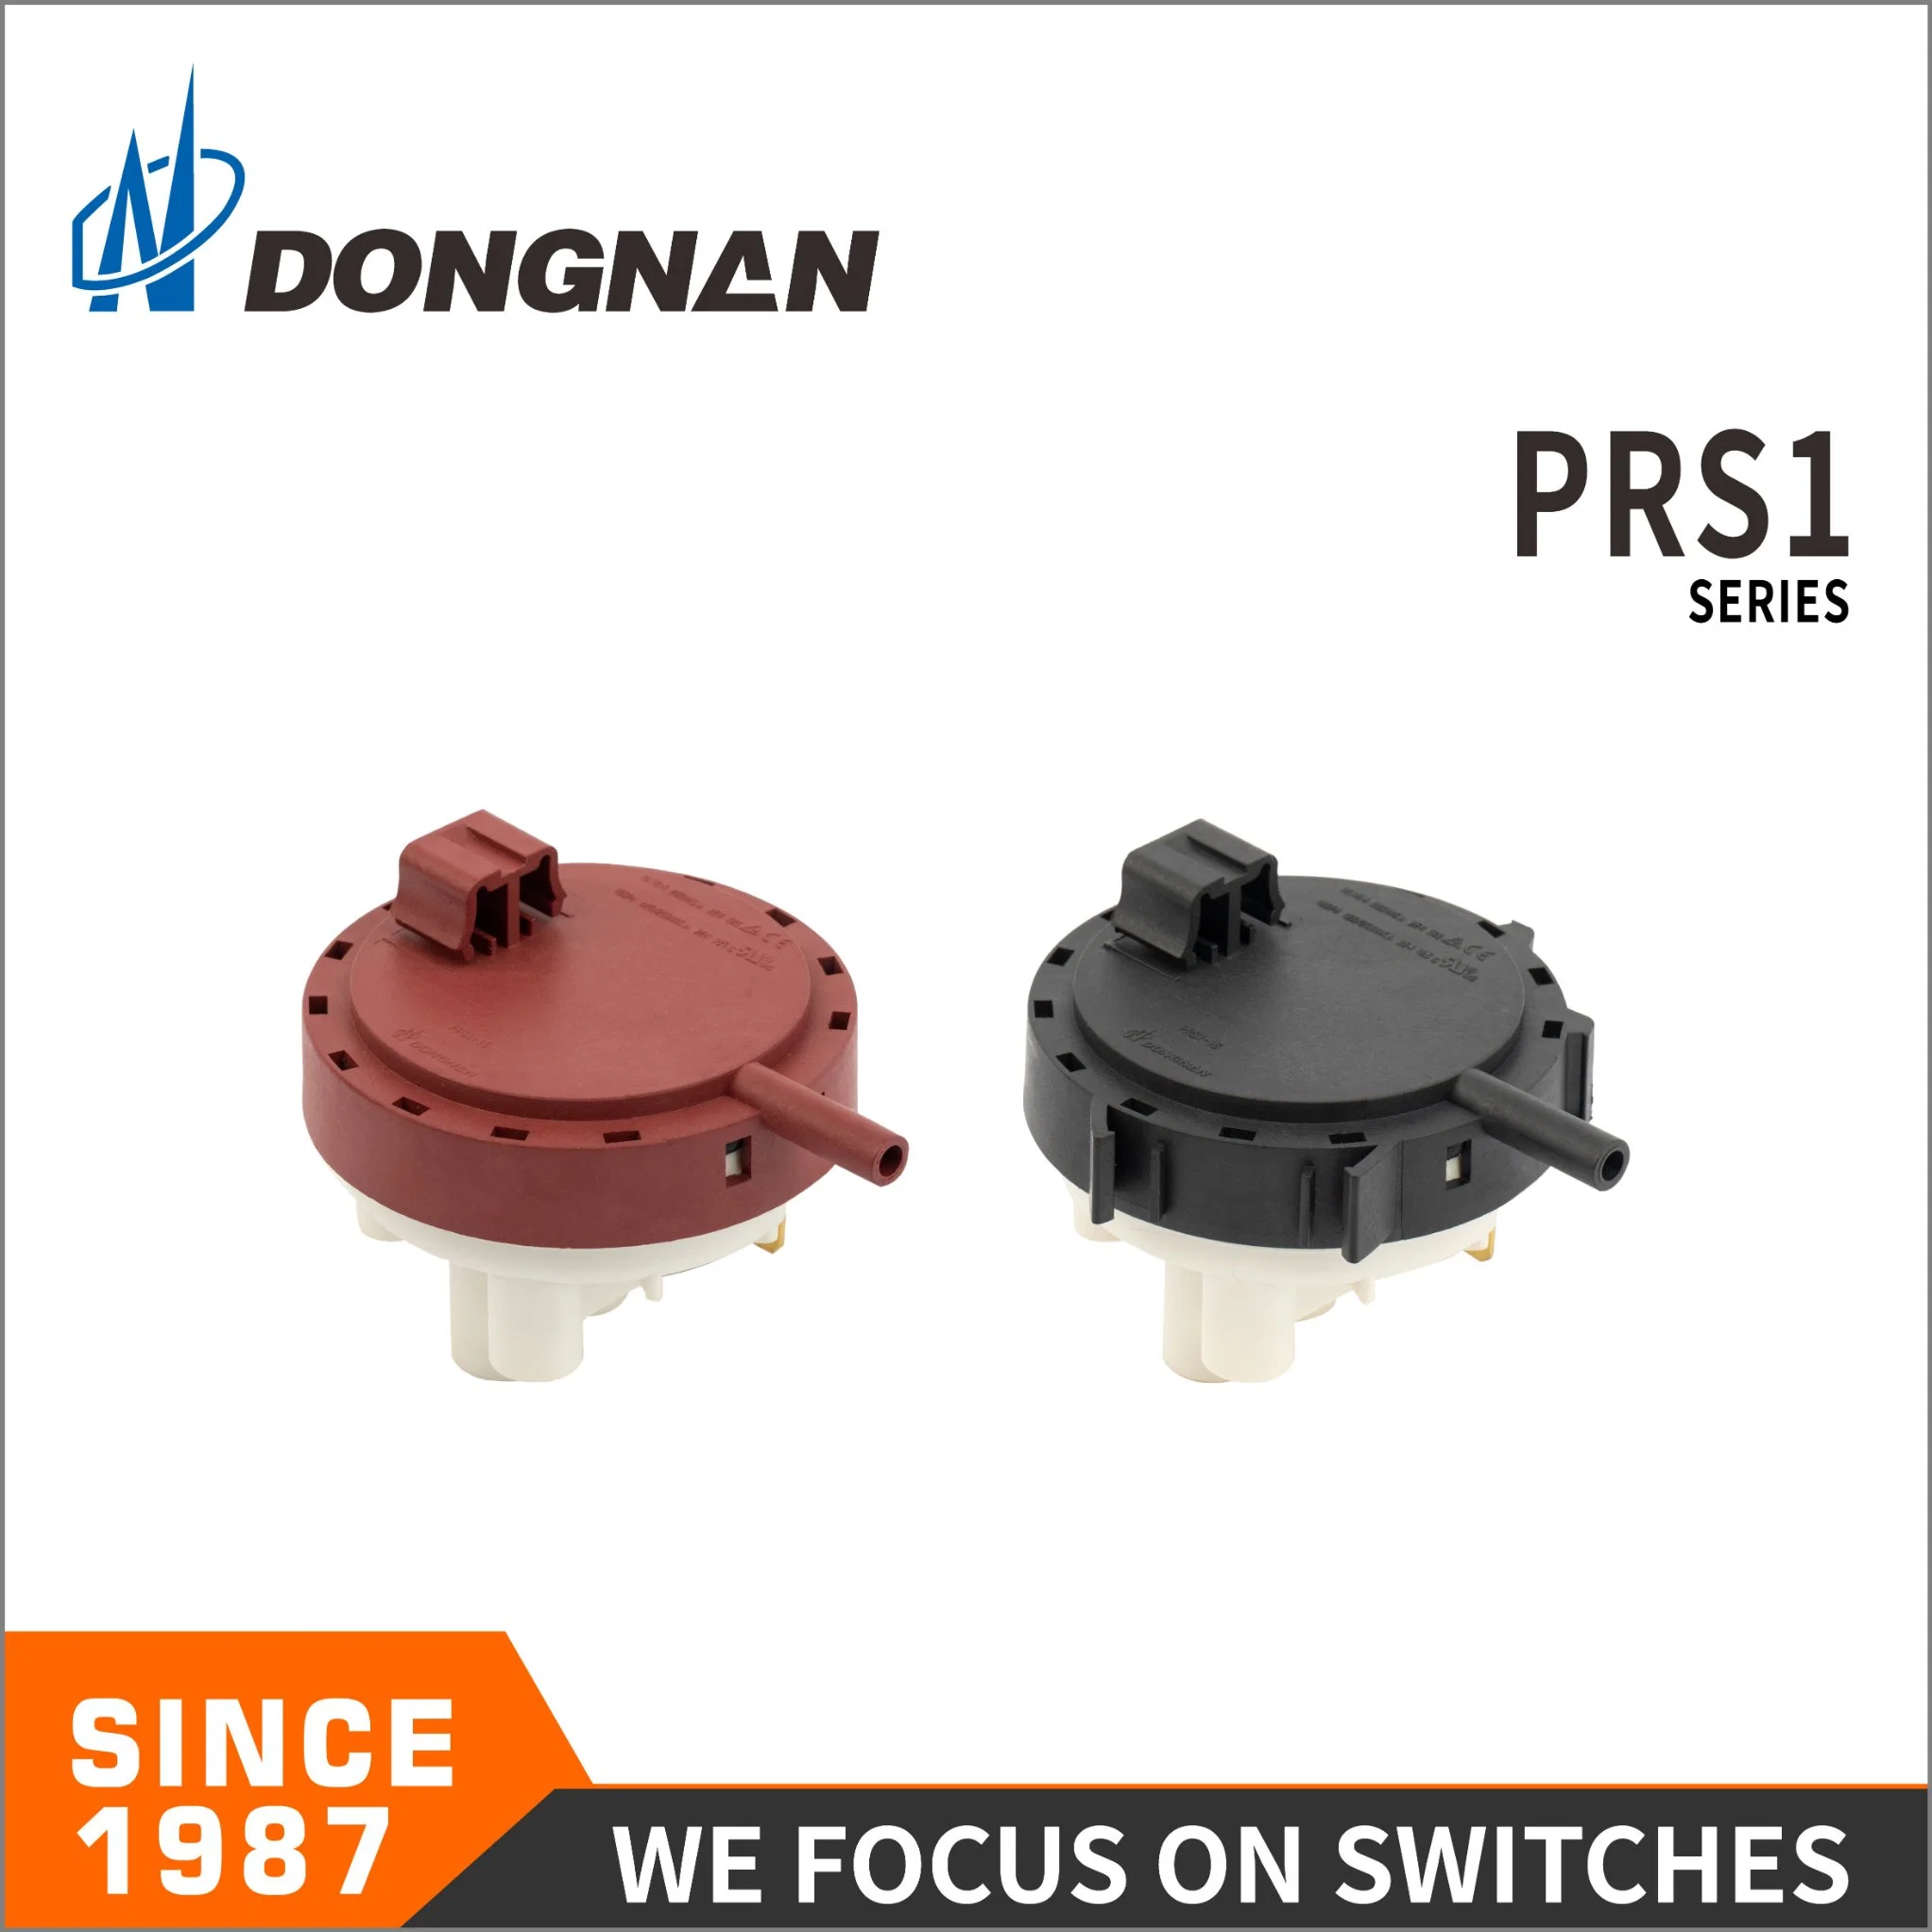 Psr1 Dishwashers and Other Home Appliances and Similar Equipment Switch